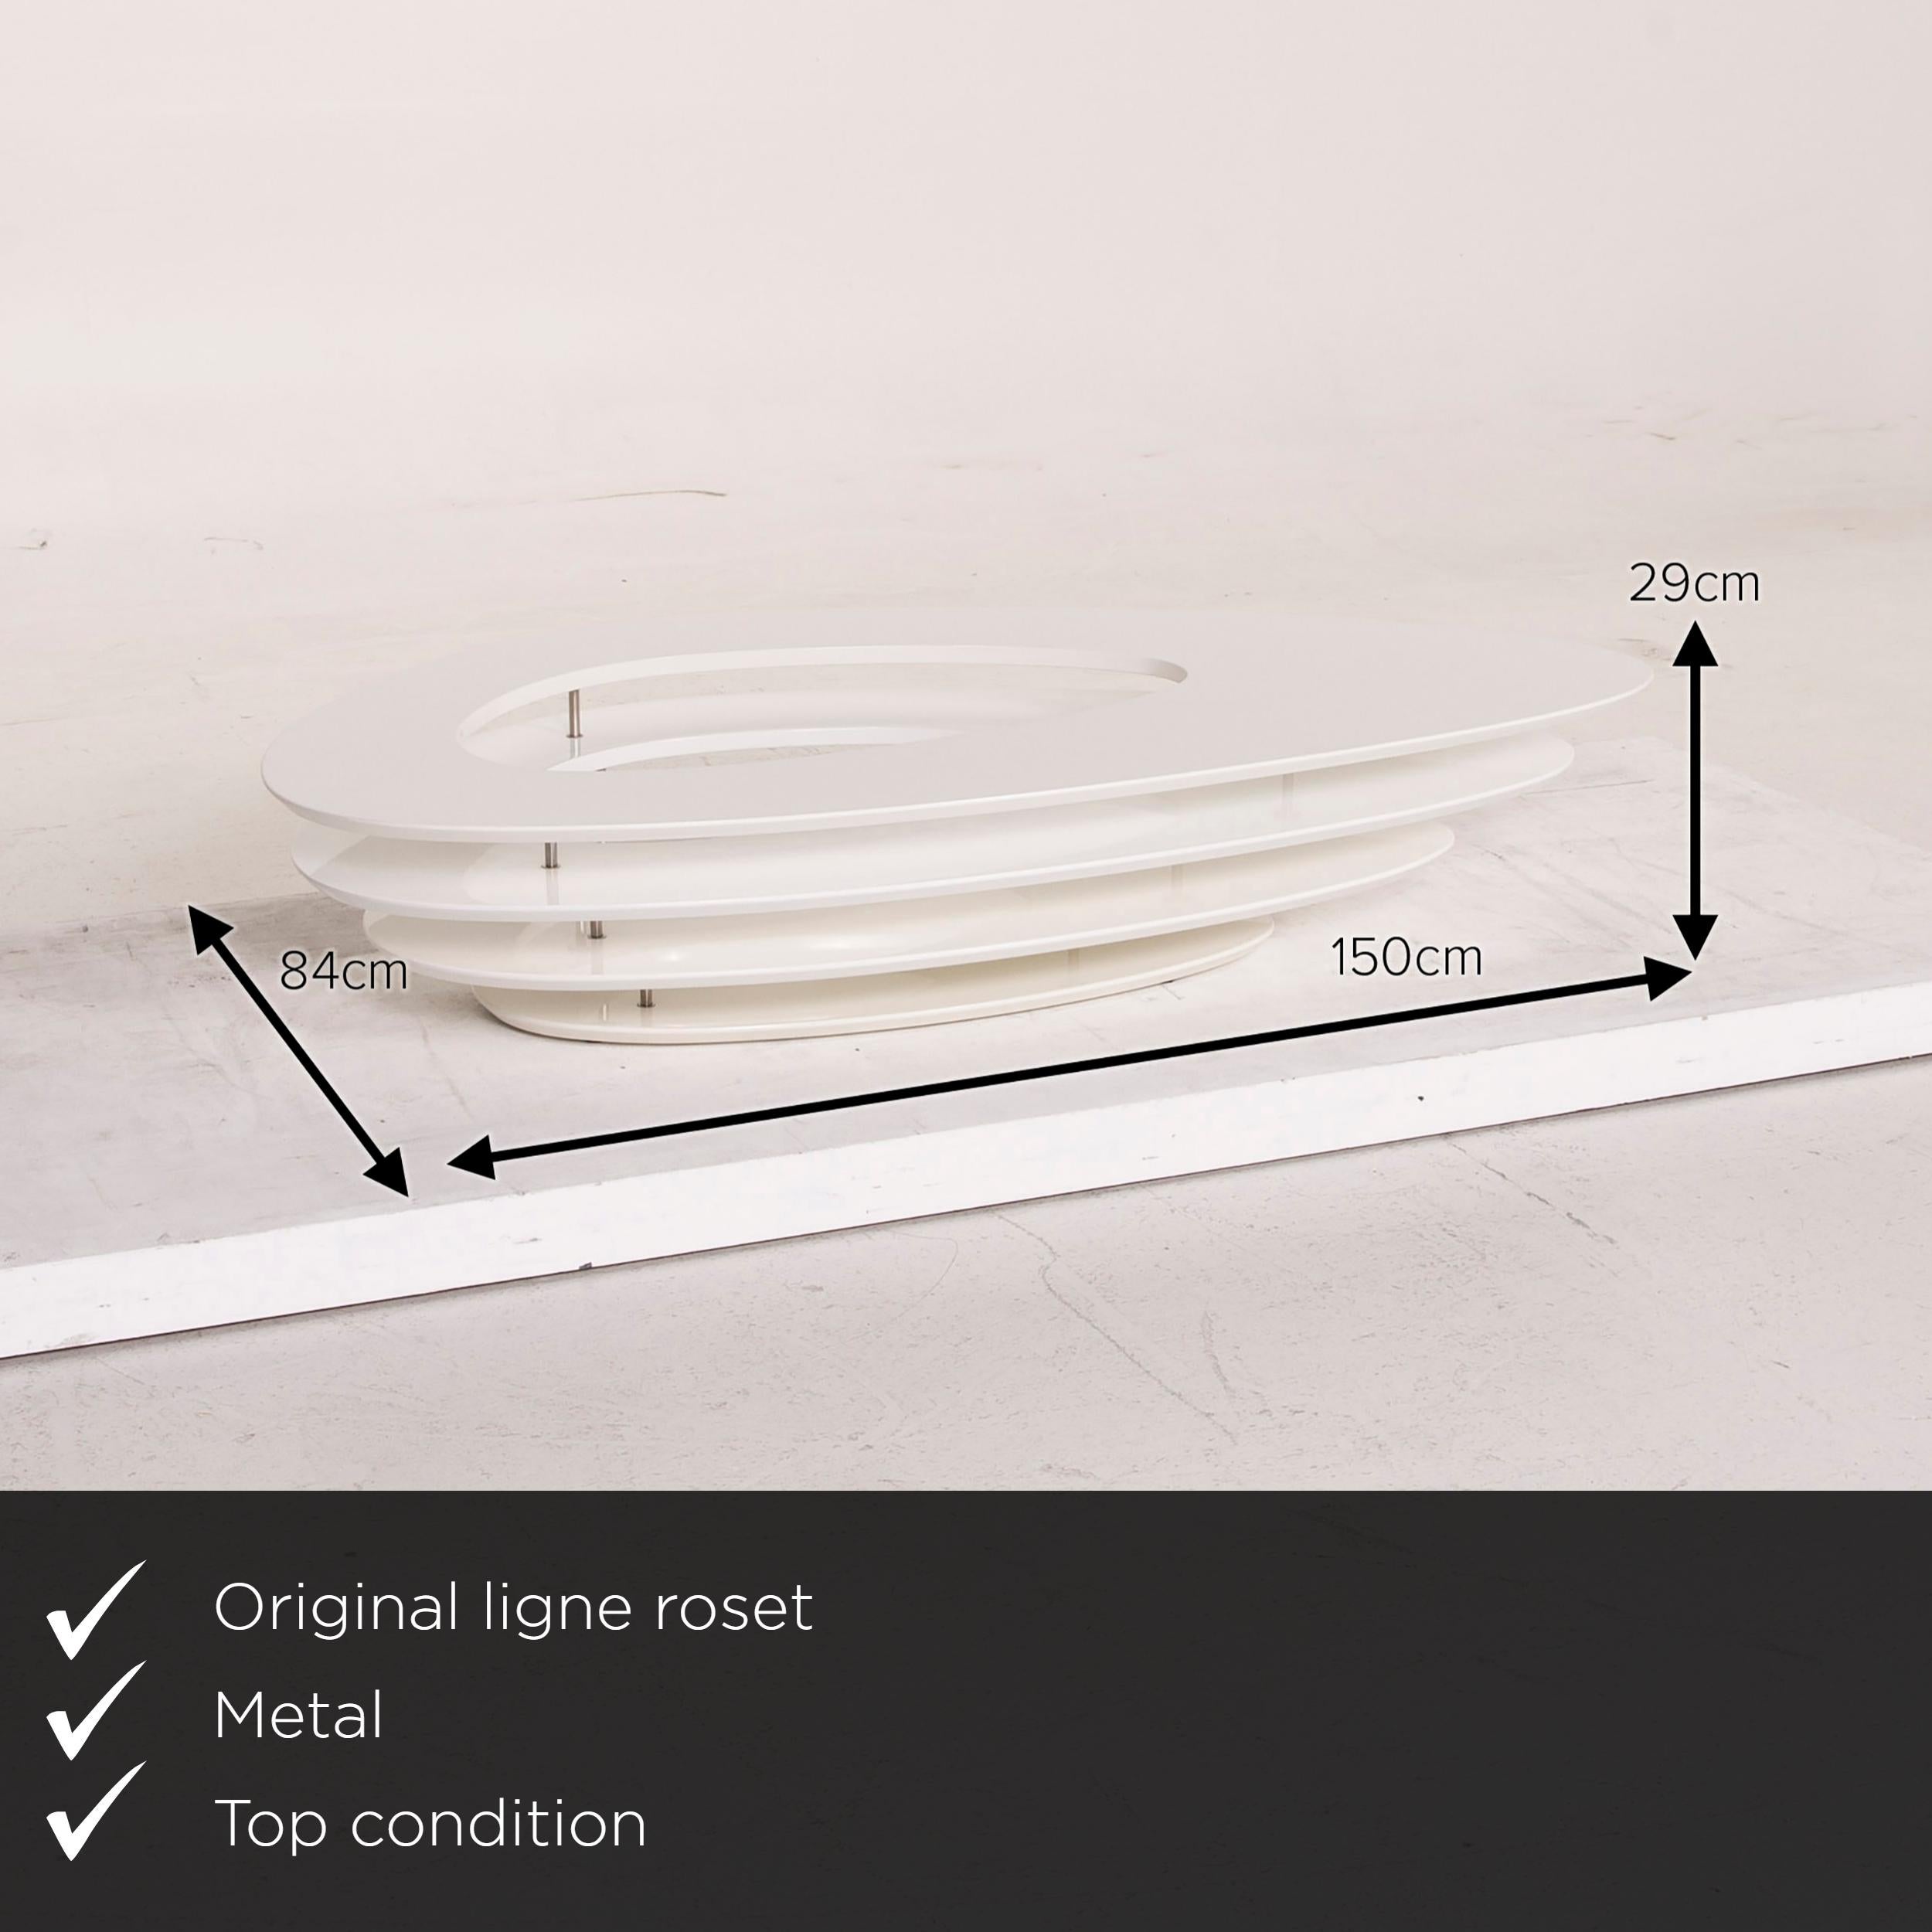 We present to you a Ligne Roset interstice plastic table white coffee table.

 

 Product measurements in centimeters:
 

 Depth 84
 Width 150
 Height 29.




  